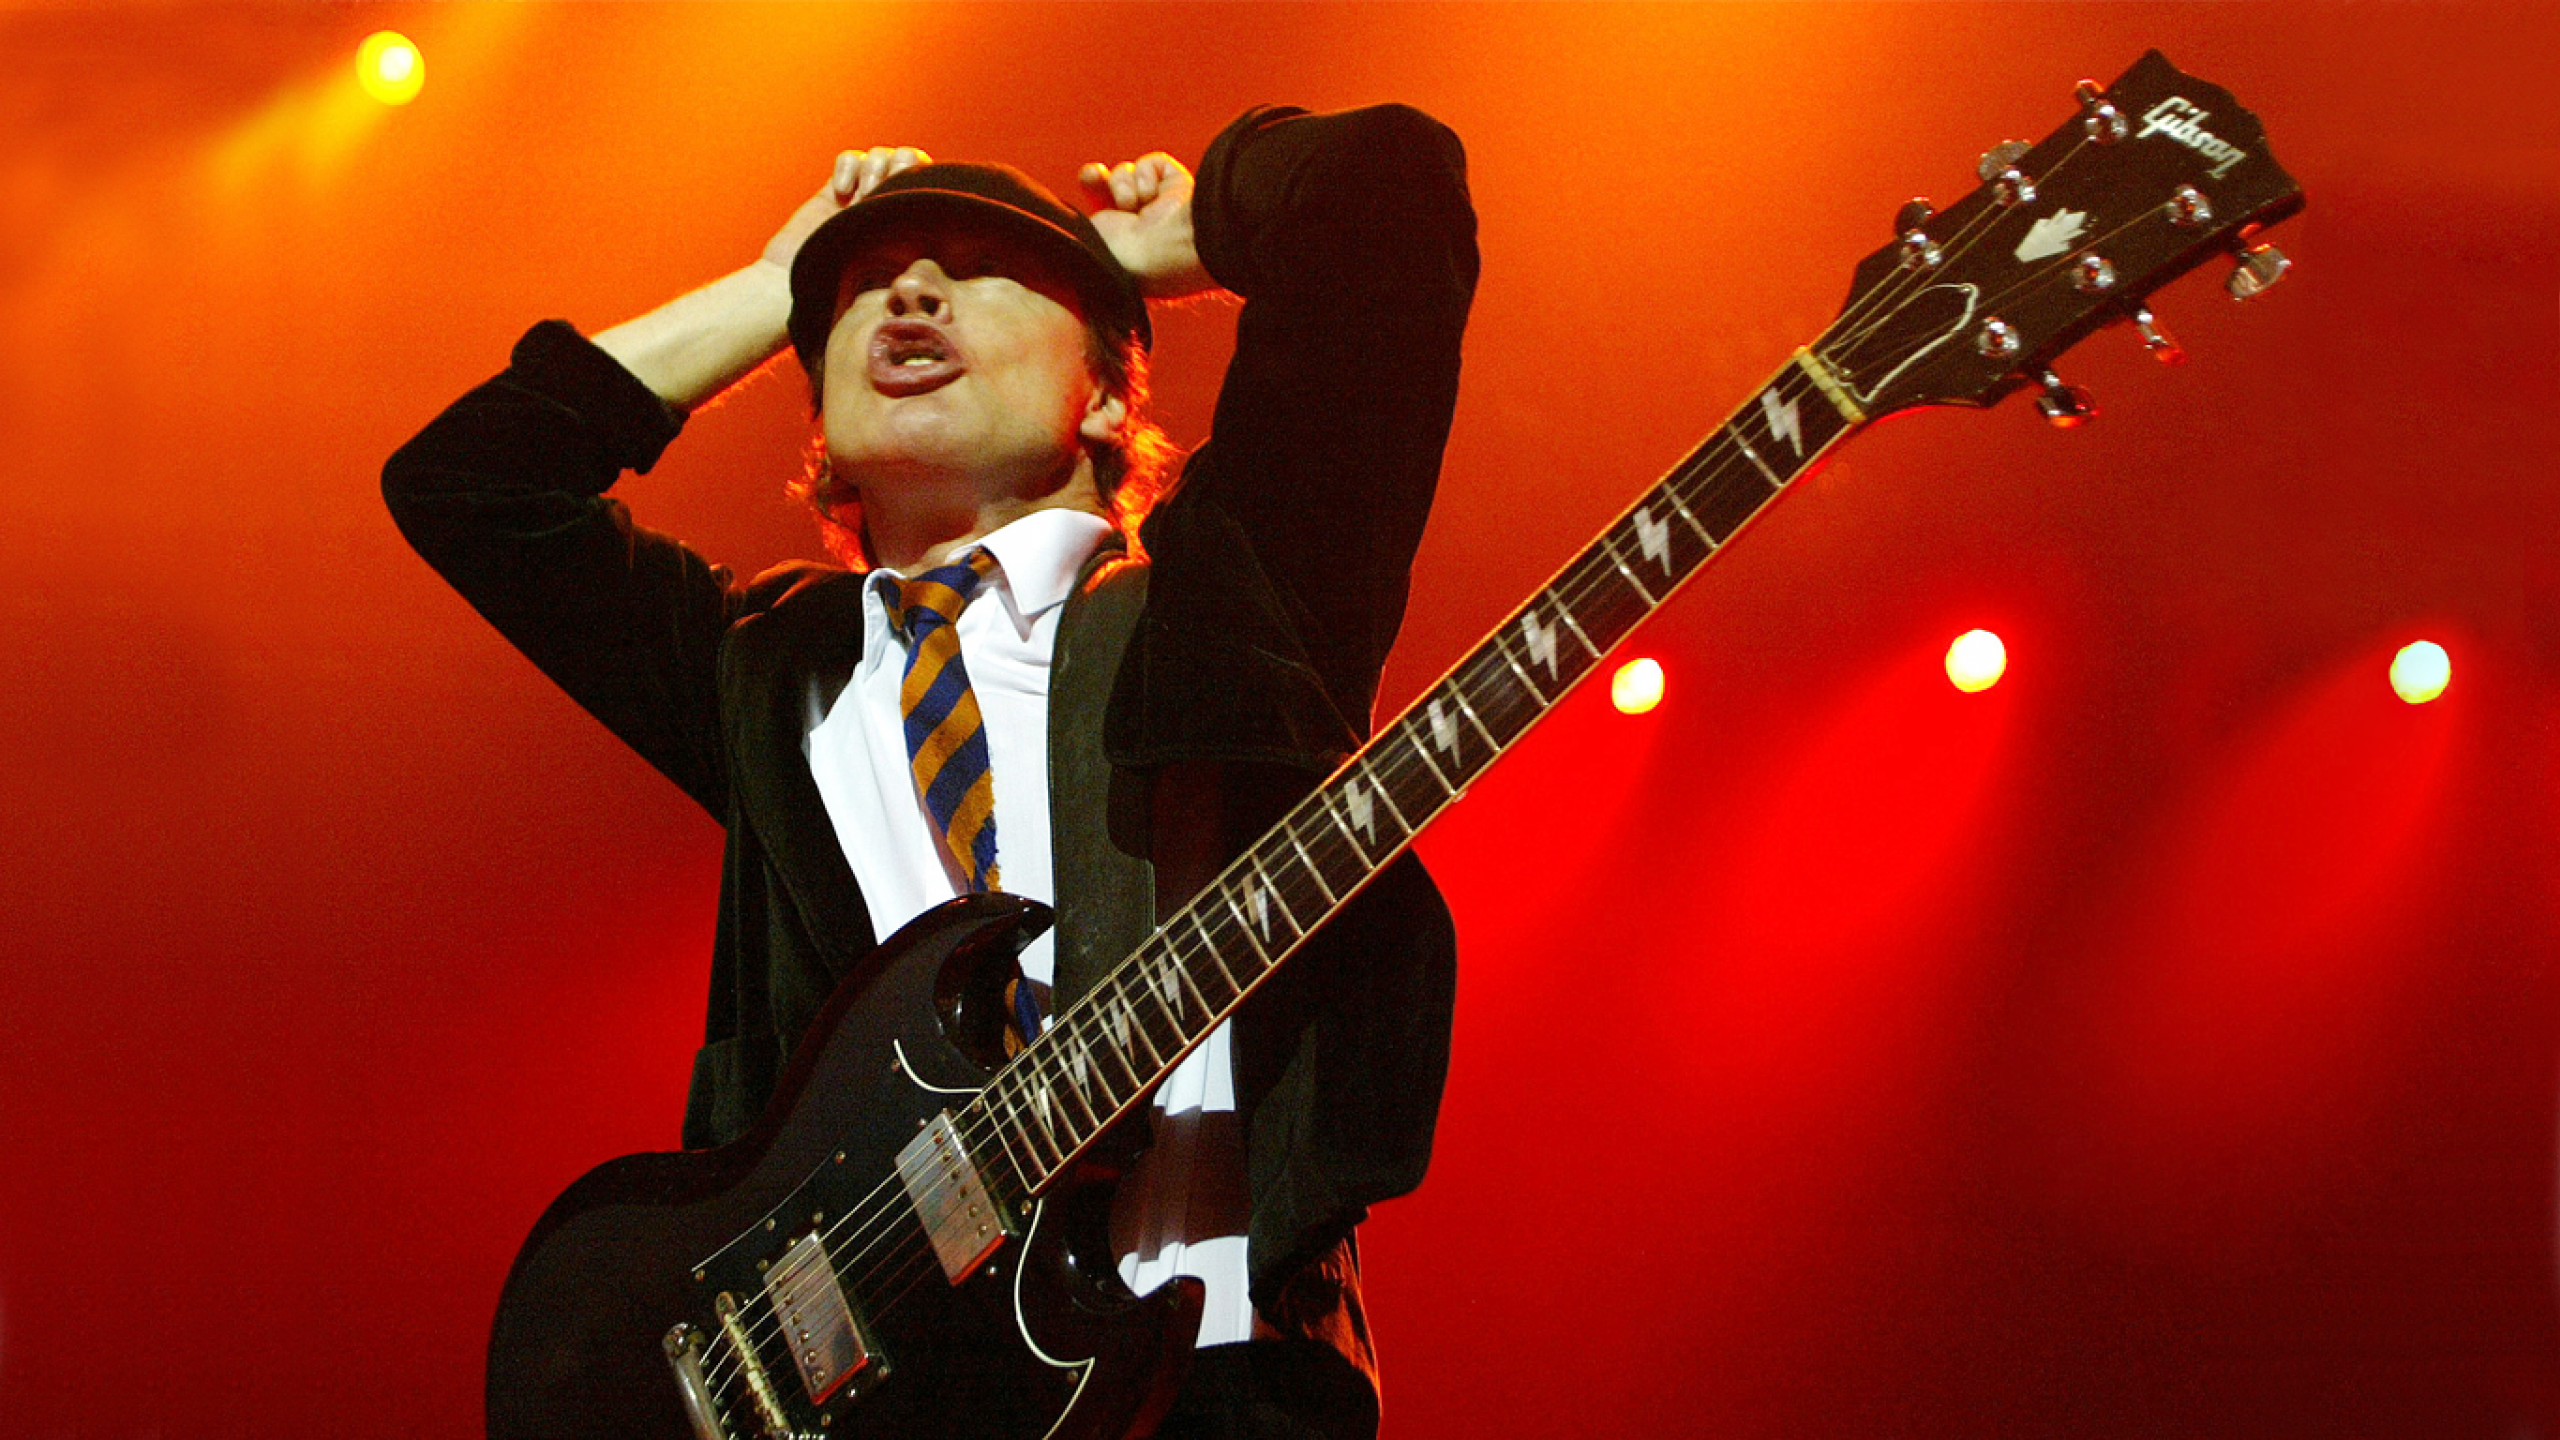 Angus Young Acdc HD Wallpaper Desktop Background